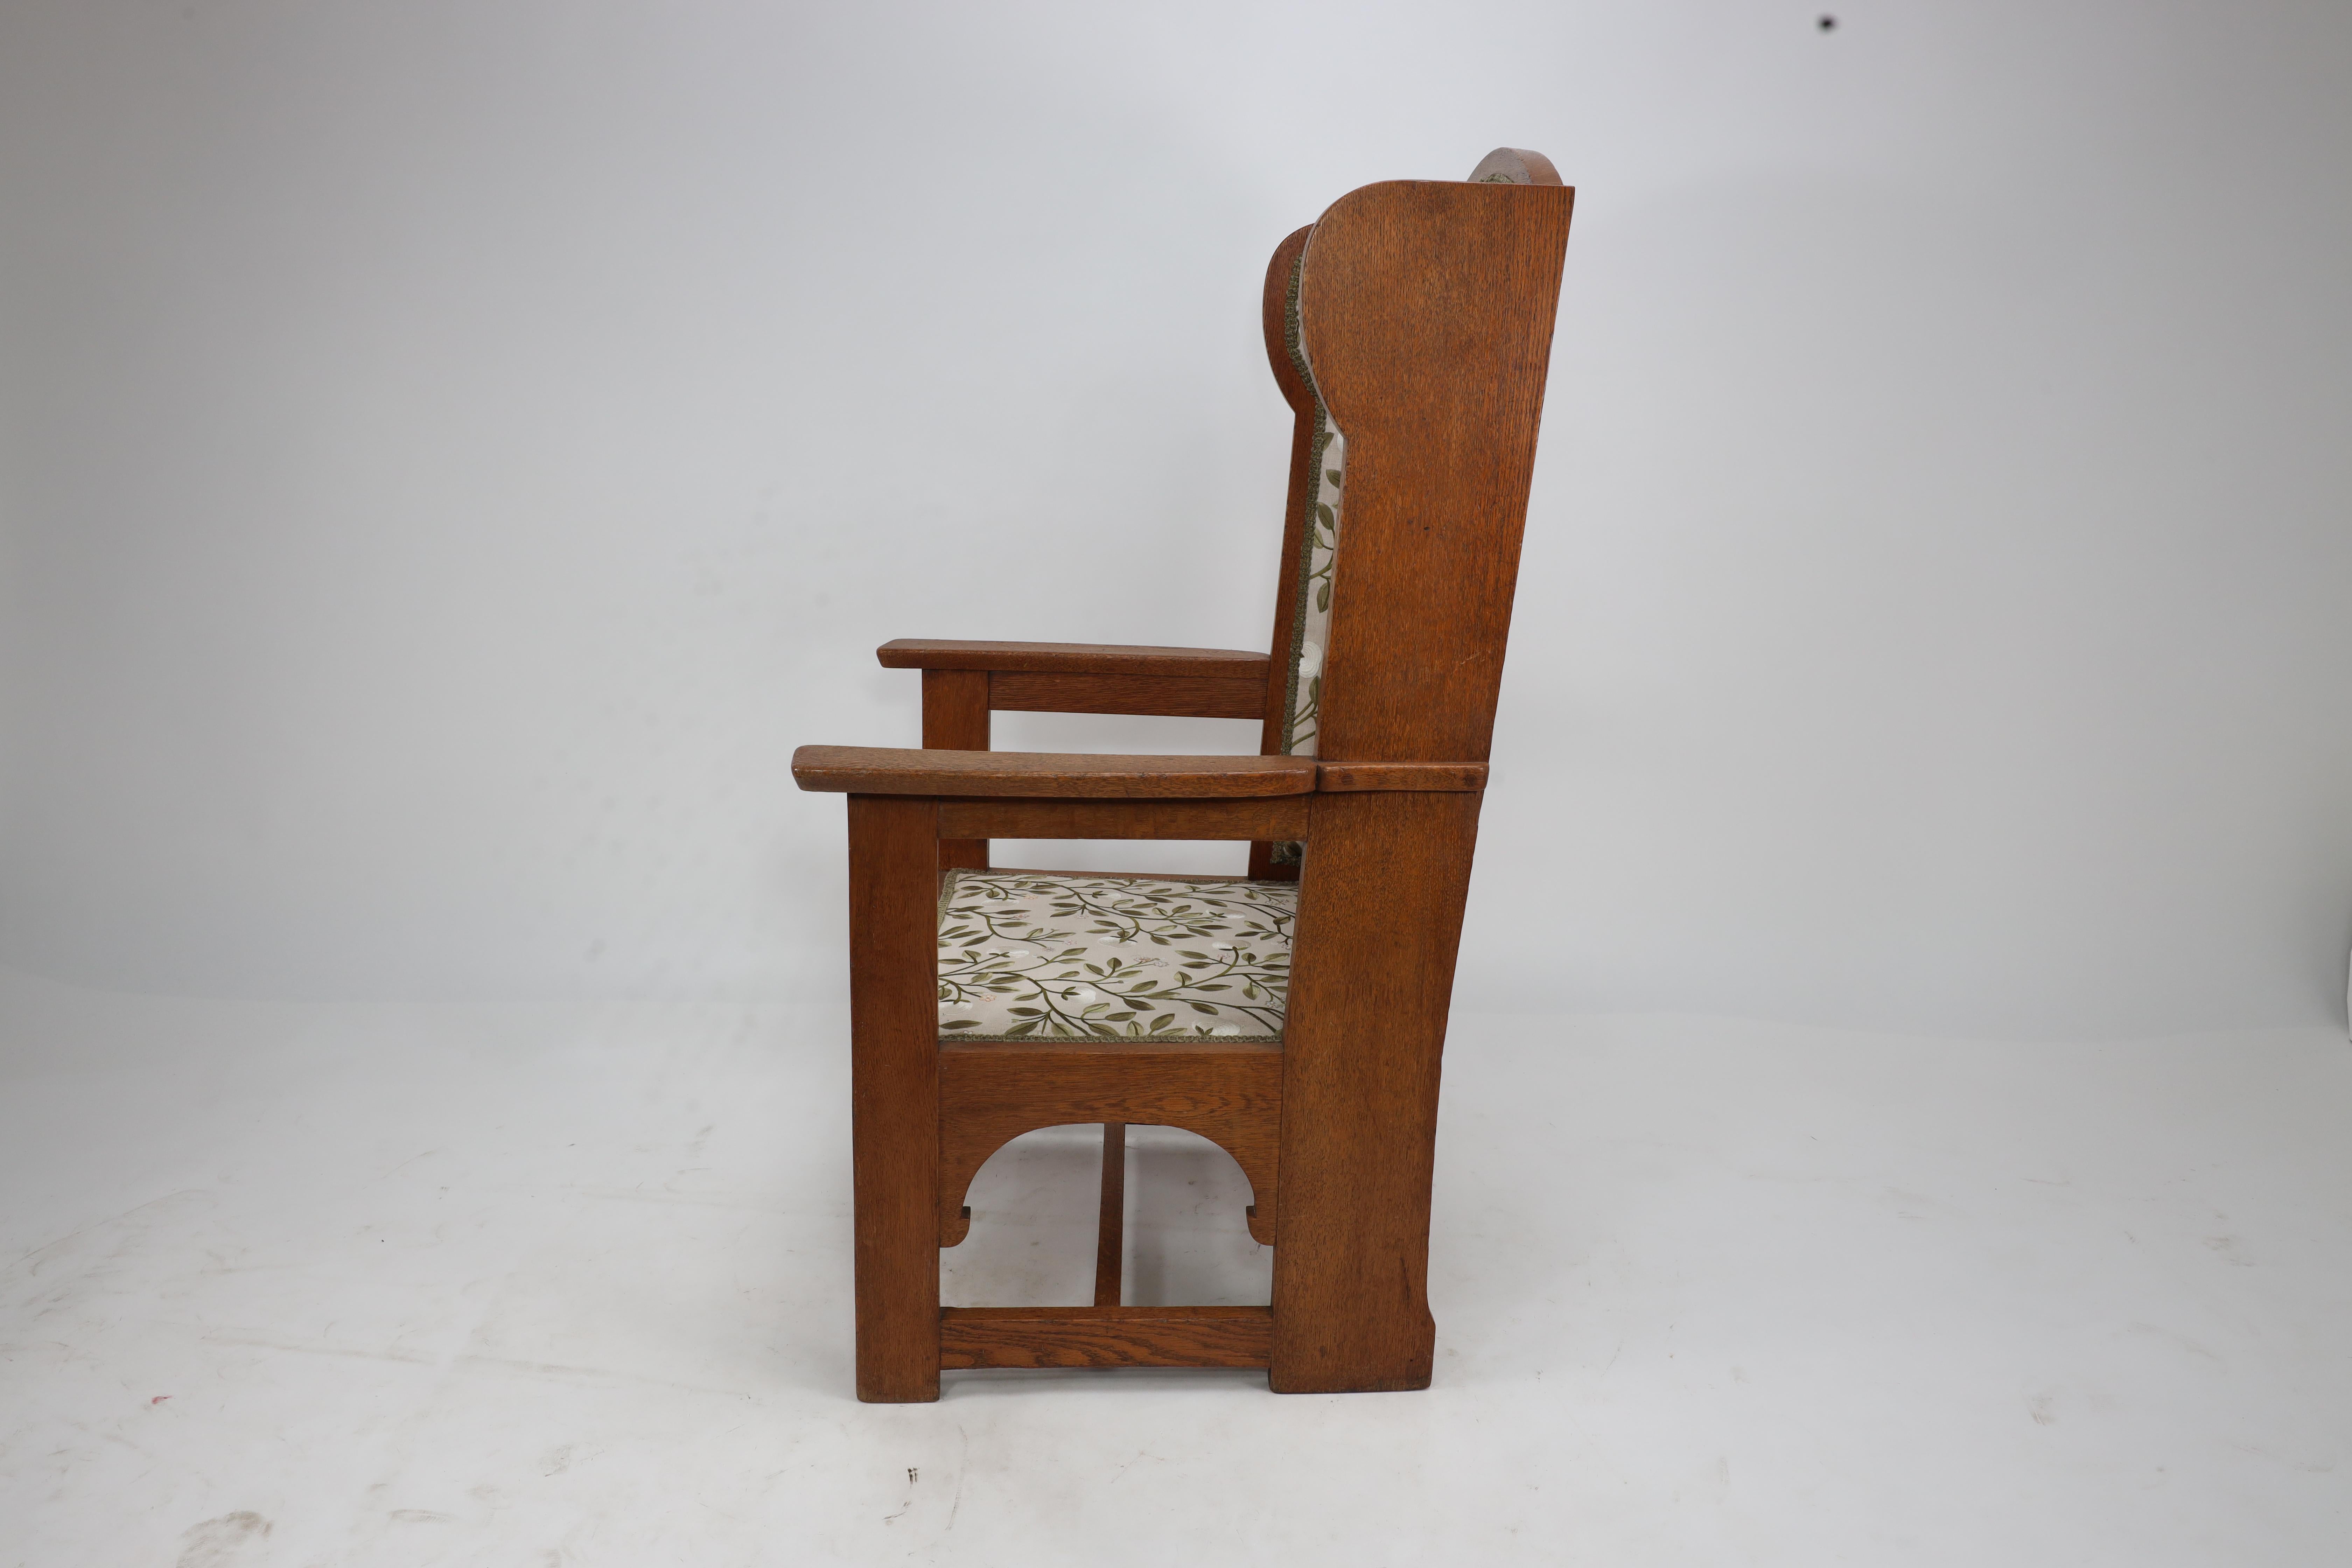 Arts and Crafts E G Punnet attributed. Probably made by William Birch. An oak wing back armchair For Sale